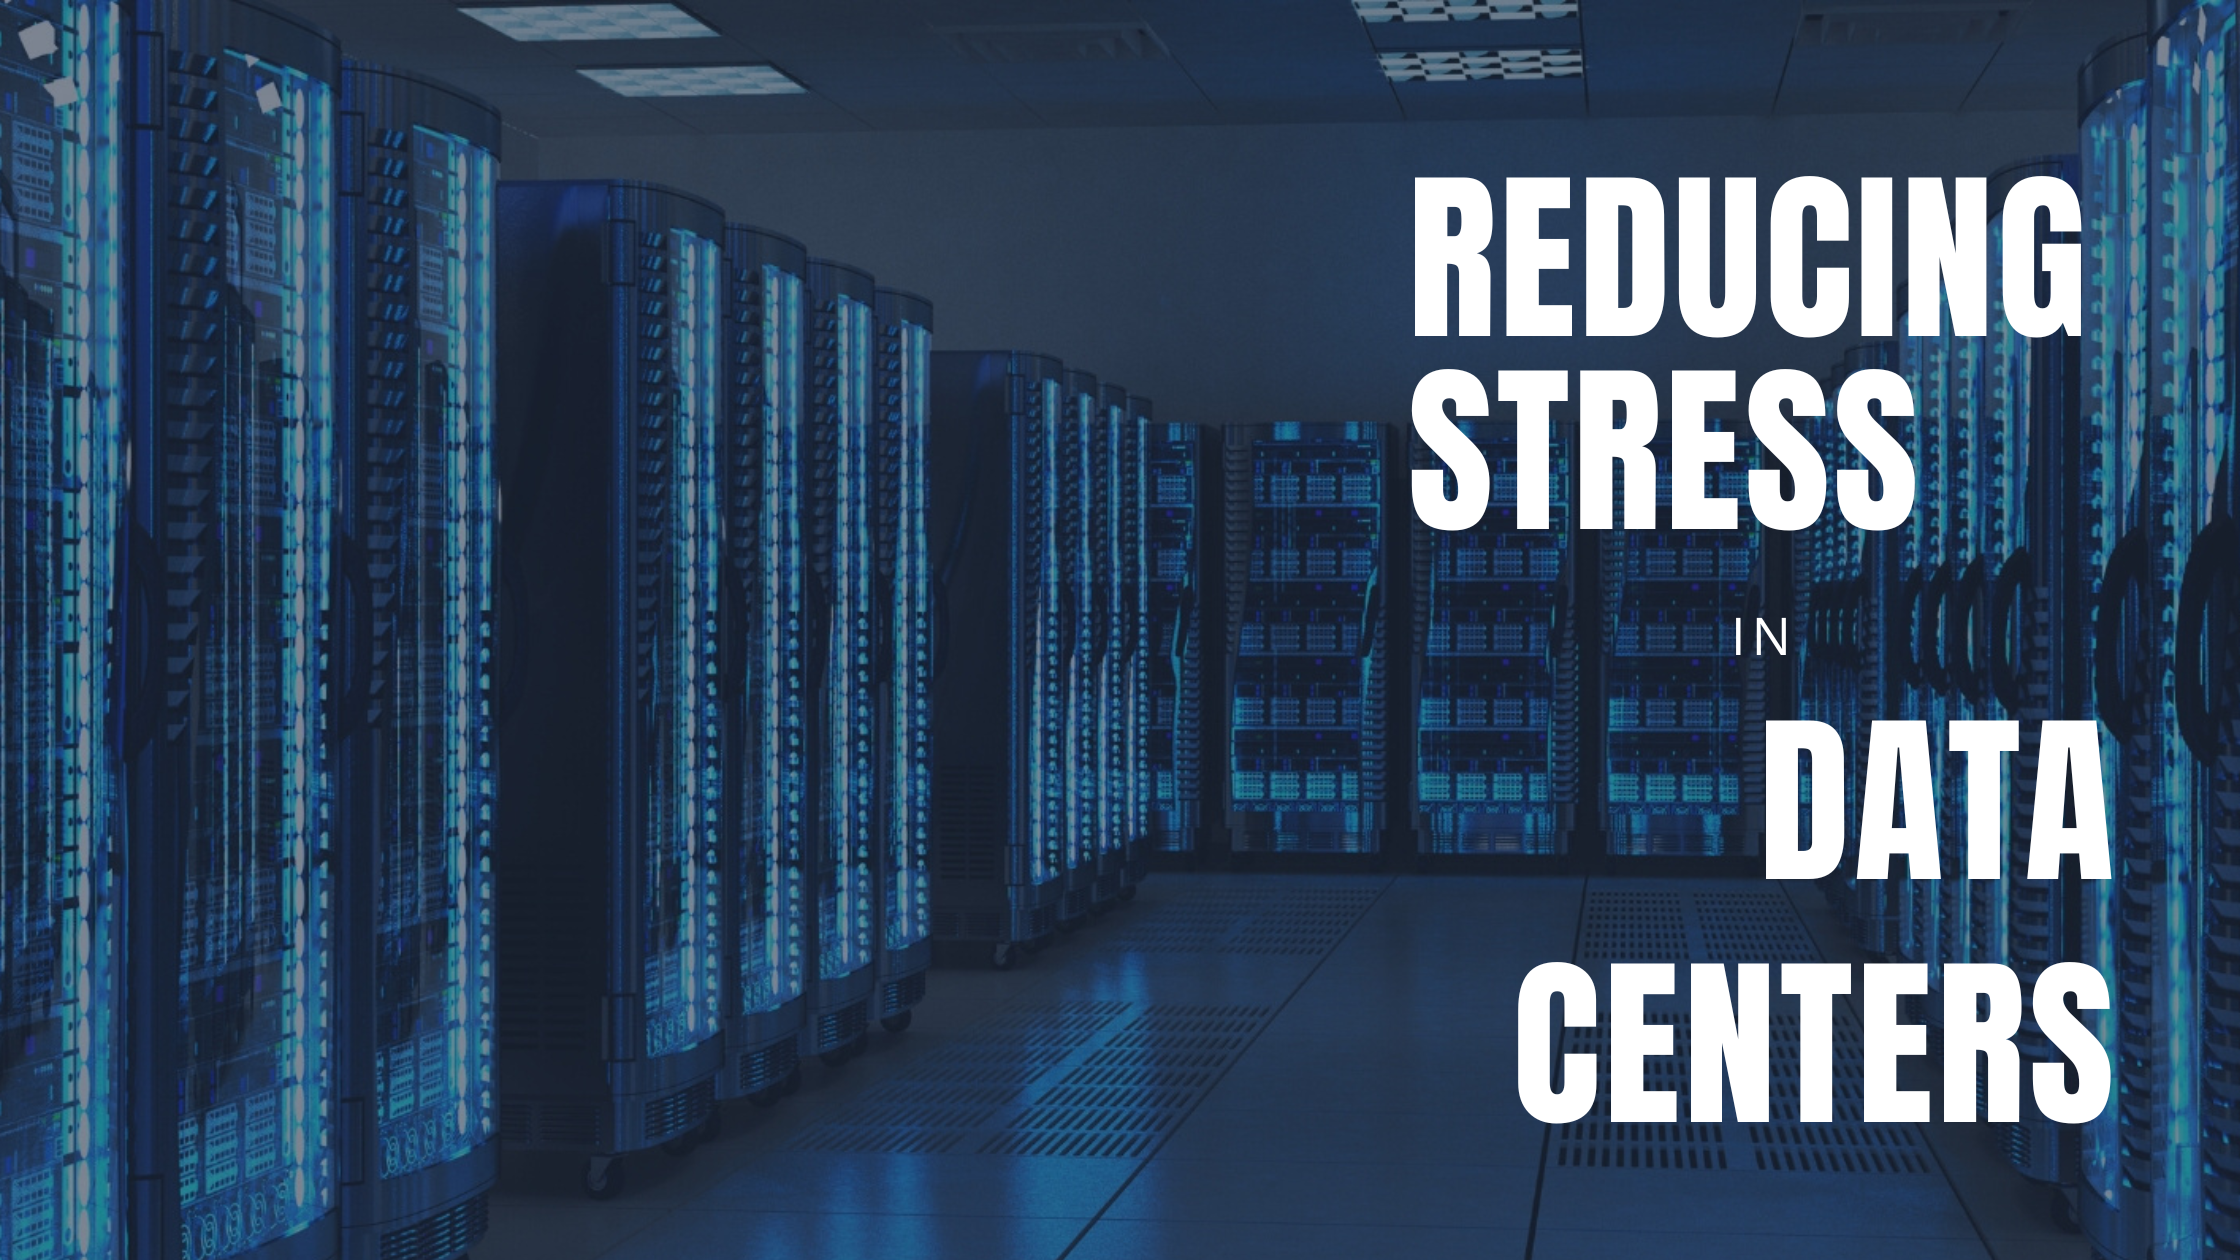 How Can You Reduce Stress in Data Centers?